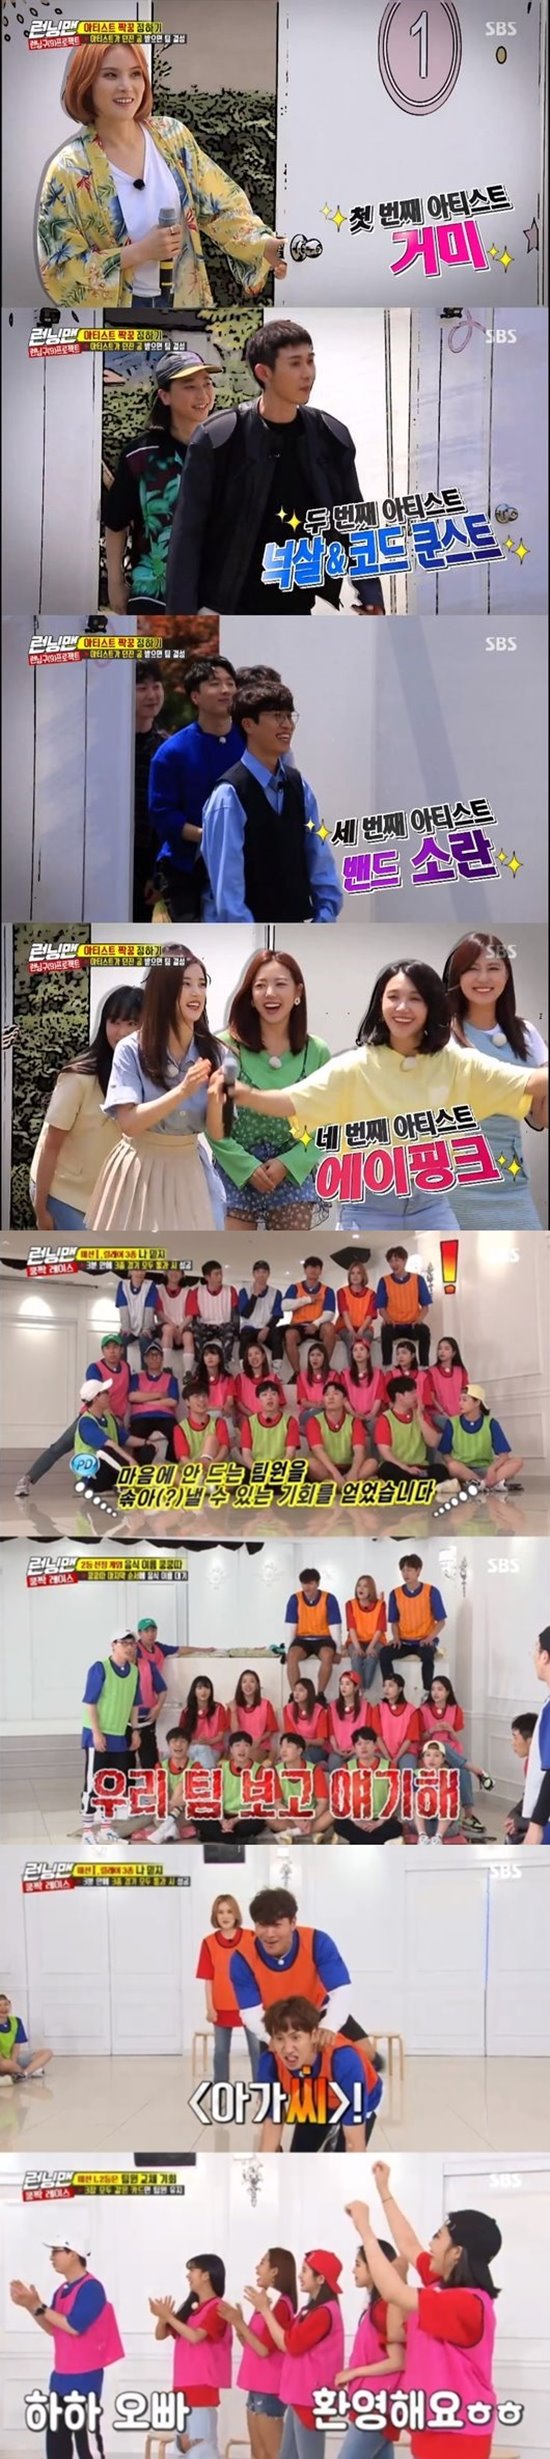 Running Man has kept its No. 1 spot in the same time zone of the 2049 Target Viewpoint, with the collaboration The Artists to hold a domestic fan meeting for the 9th anniversary.According to Nielsen Korea, the ratings agency Running Man, which aired on the 7th, soared to 8.7% of the highest audience rating per minute, and the 2049 target audience rating, an important indicator of major advertising officials, recorded 4% (based on the second part of the audience rating of Seoul Capital Area households), ranking first in the same time zone, surpassing the Masked Wang and the Donkey Ears.The average audience rating was 4.9% in the first part and 6.7% in the second part (based on the audience rating of the Seoul Capital Area household).The broadcast was made up of the Running Zone Project, and the top four artists who will hold a 9th anniversary Korean fan meeting with the members were unveiled.The Artist 1 team and two members had to be paired, and the OST Queen spider first appeared, paired with Kim Jong-kook and Lee Kwang-soo.Nunsal & Cod Kunst was in close contact with Song Ji-hyo X Haha, and the band disturbance was paired with Yoo Jae-Suk X Jeon So-min and girl group Apink with Ji Suk-jin X Yang Se-chan.In particular, Nucksal and Song Ji-hyo made a bigger smile as they became a hot topic with resemblance.With the first pair set, it was decorated with a kung-kak race that takes place in a total of three rounds.The final team was able to stand on stage as a collaboration team, and all teams played a confrontation without concessions.In the first showdown, the spider X Kim Jong-kook X Lee Kwang-soo team took first place and did not change the team member, but the second-ranked Apink X Ji Suk-jin X Yang Se-chan team did not agree.Eventually, Yoo Jae-Suk X Haha was paired with Apink, and the scene was the best one minute with a highest audience rating of 8.7%.Photo = SBS Broadcasting Screen